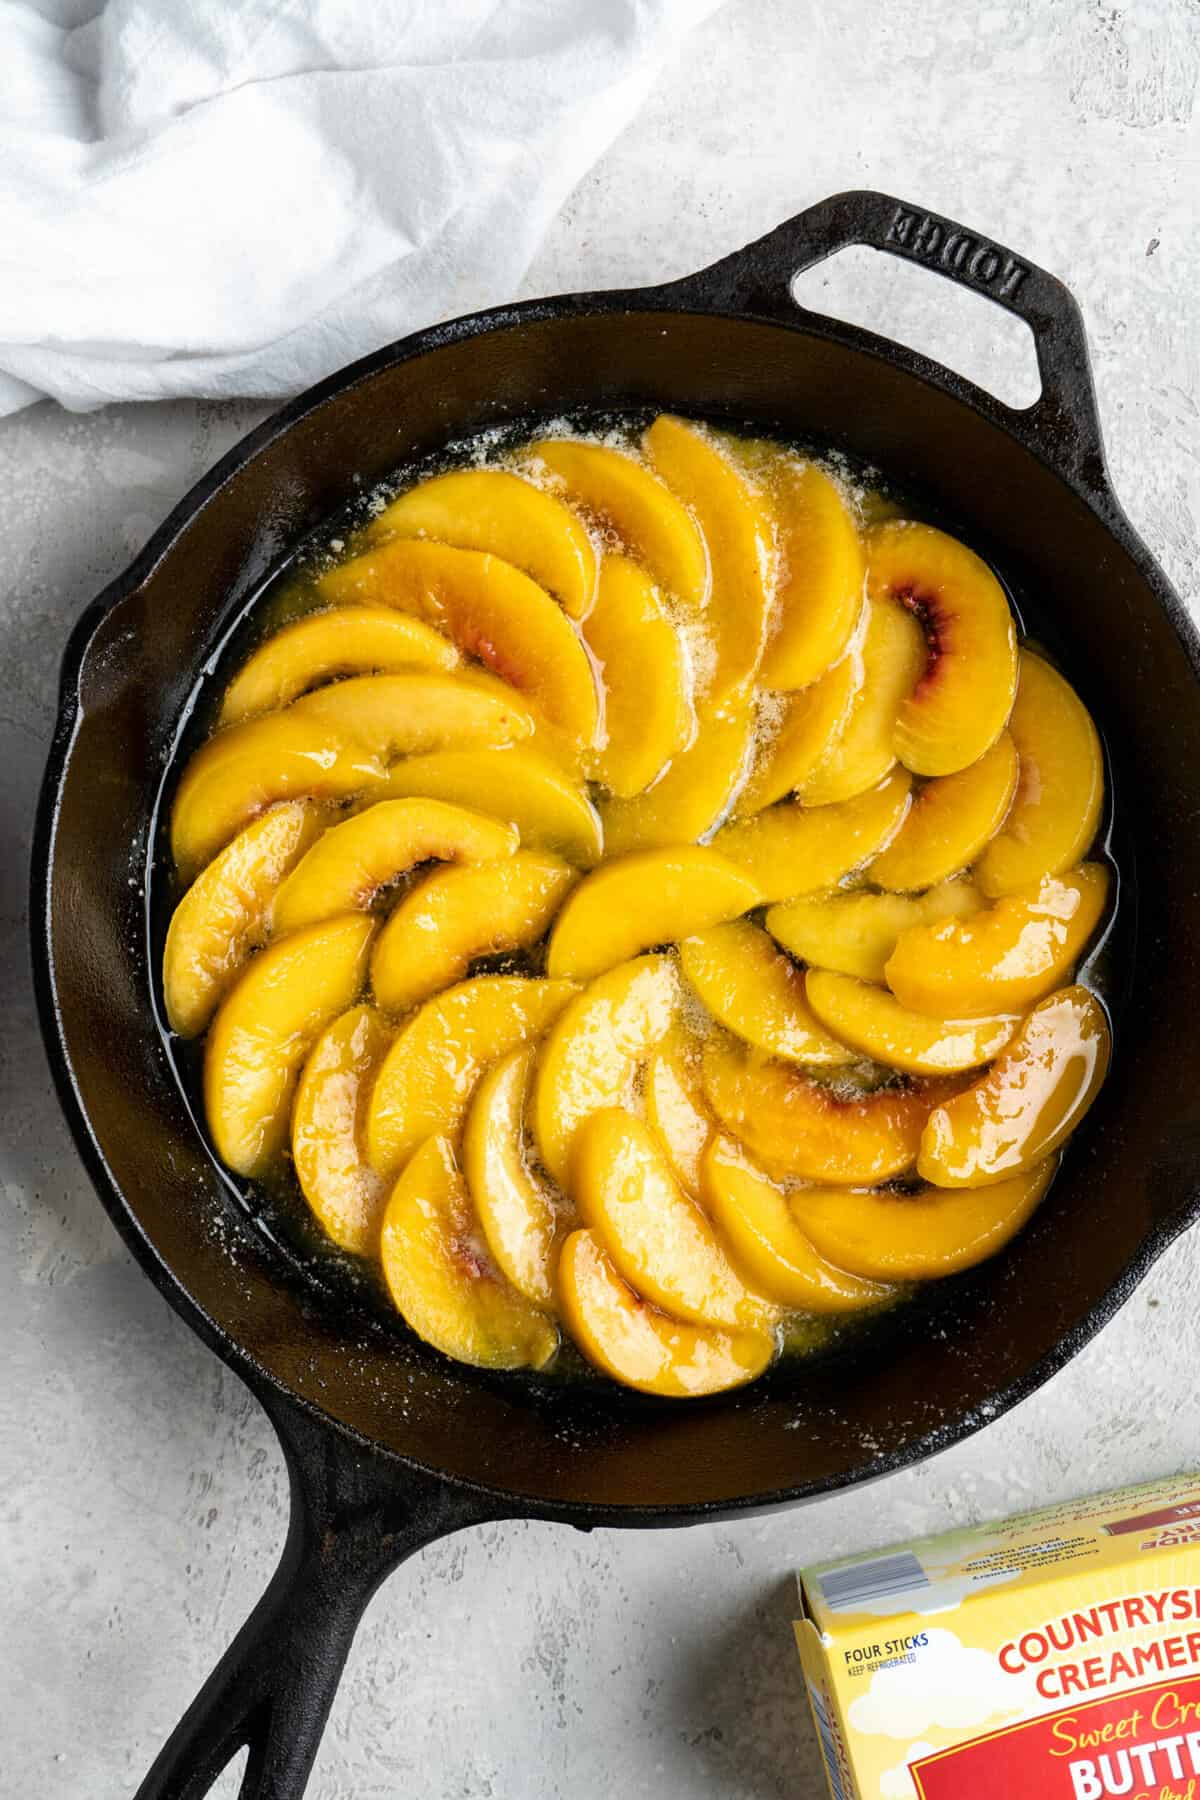 Peach slices placed on the bottom of a cast iron skillet